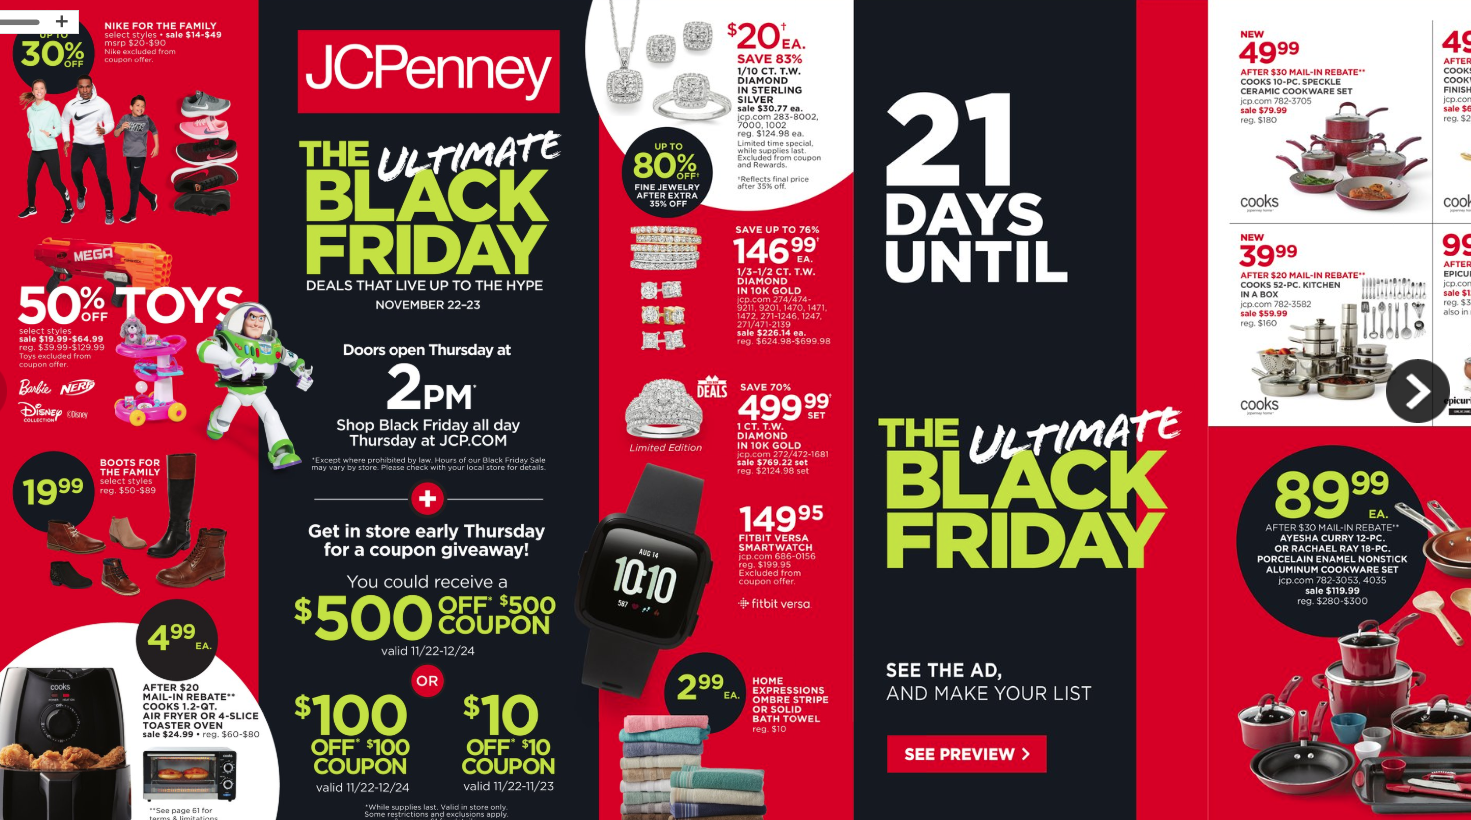 JCPenney Black Friday 2018 ad: UHDTVs, Nike/adidas apparel, kitchen - What Time Jcpenney Black Friday Deals End